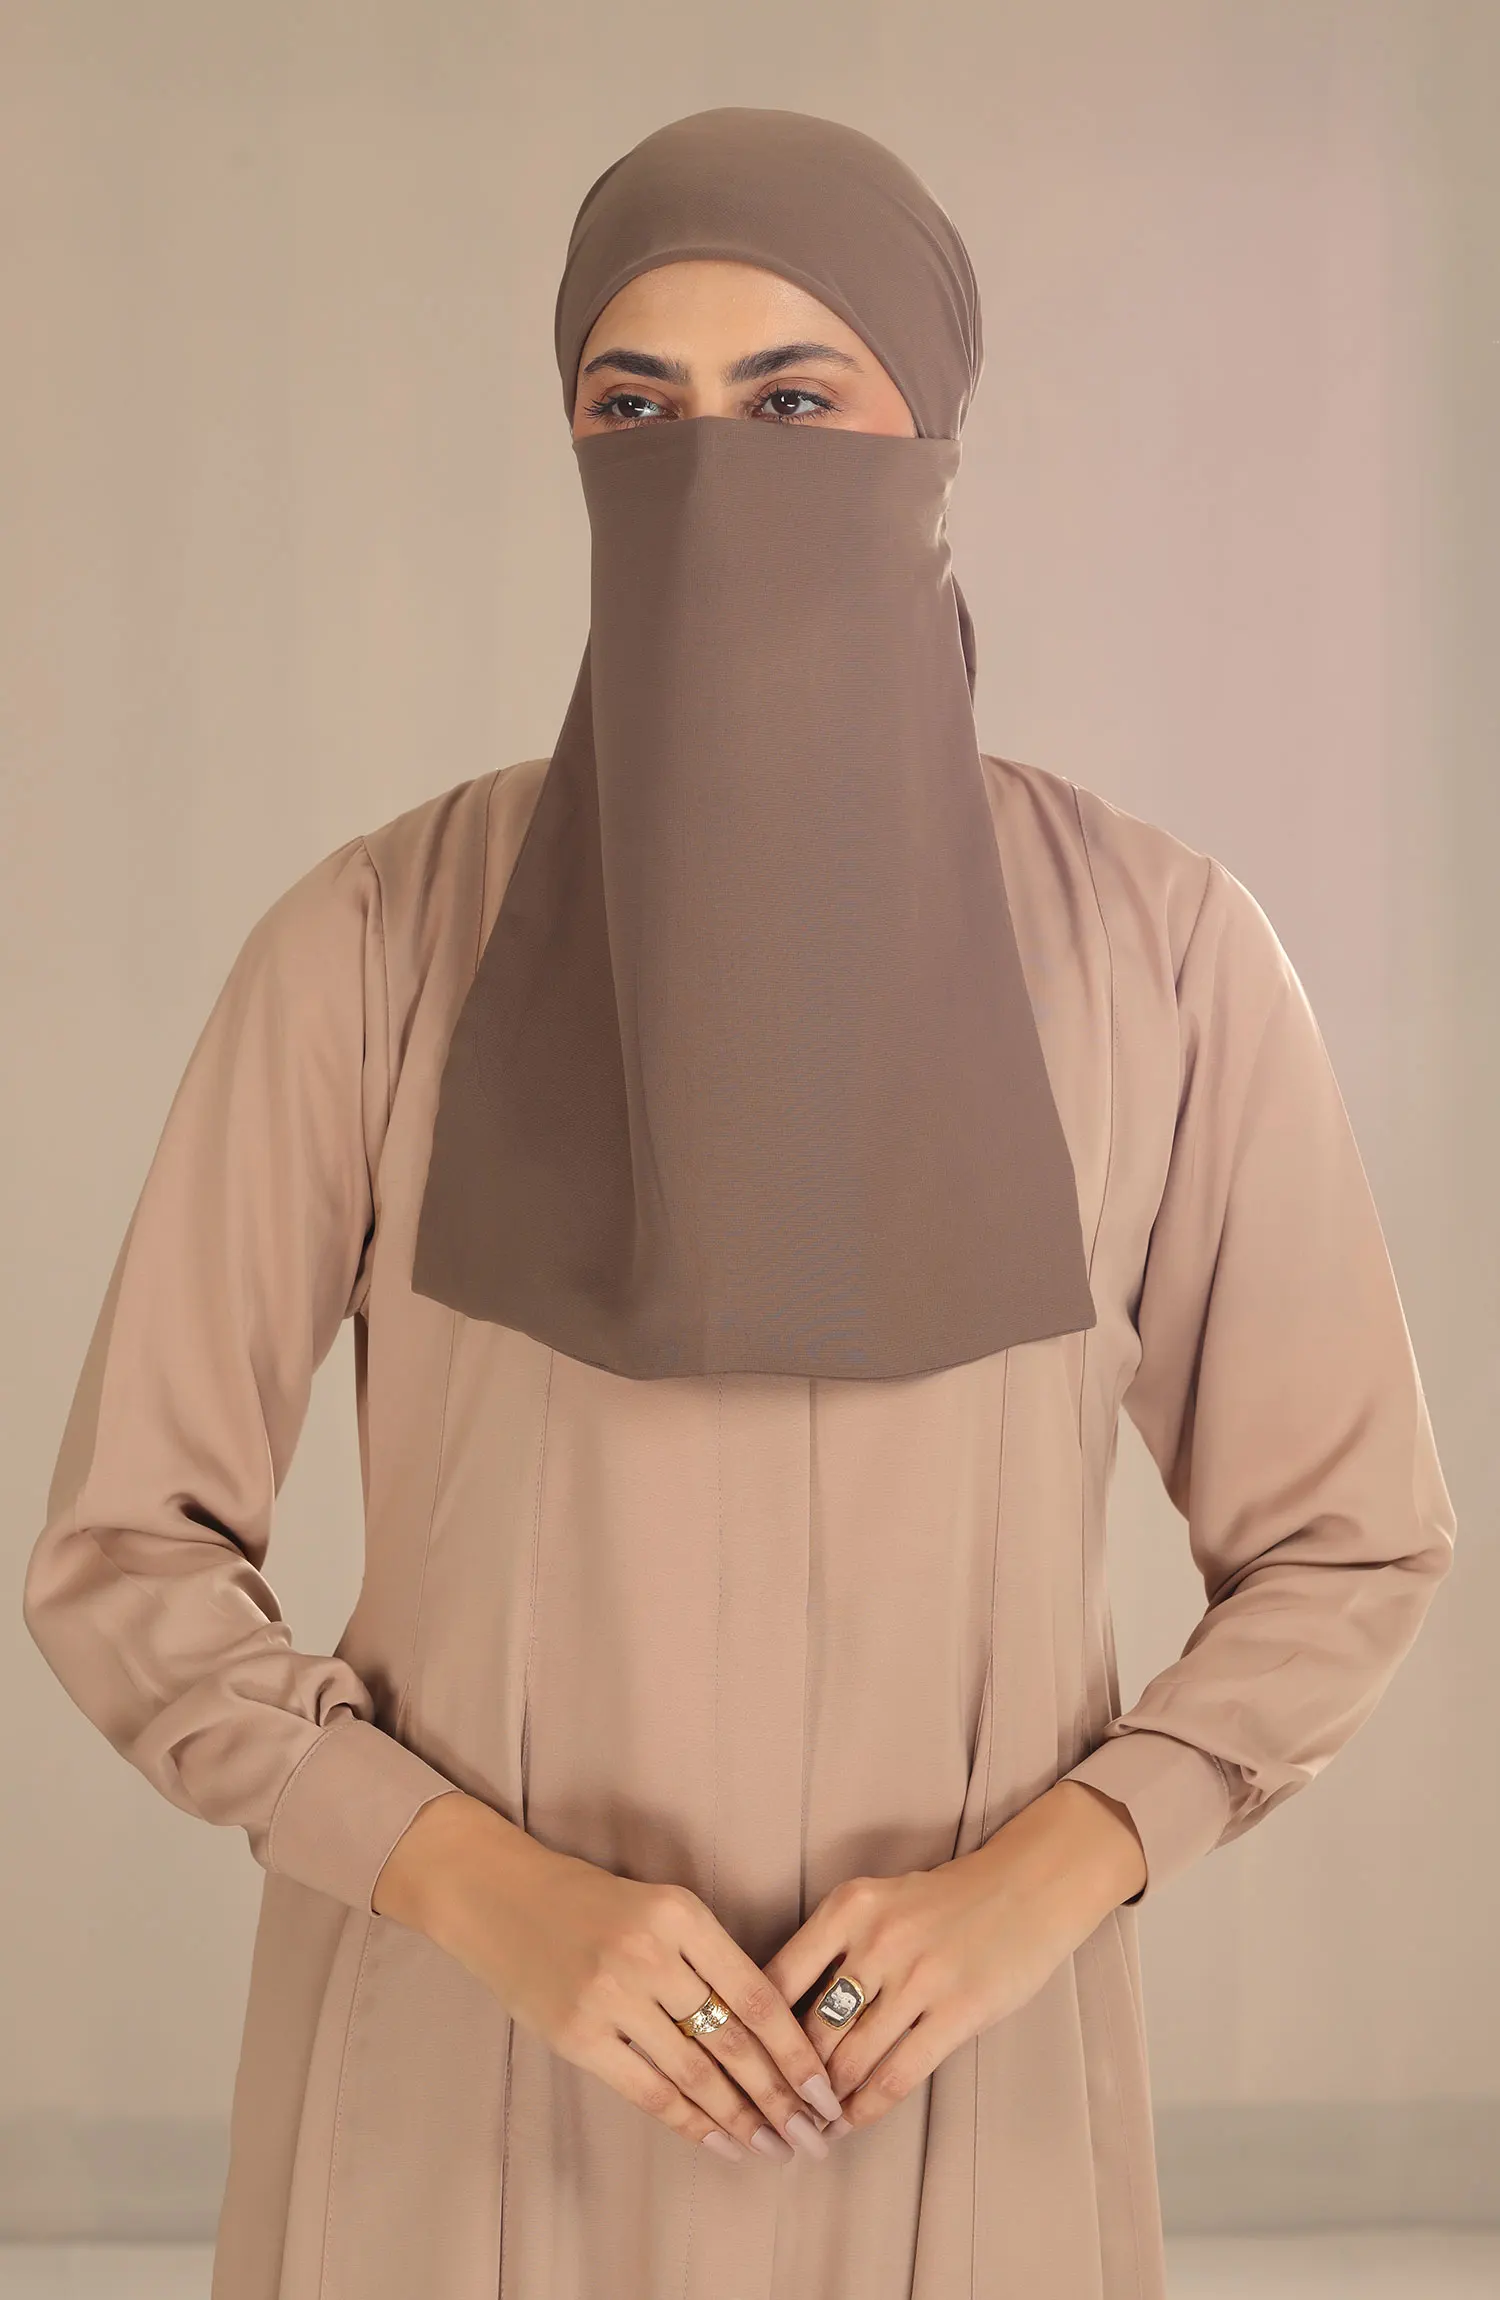 Black Camels Half Niqab With Ties Collection - HNWT-02